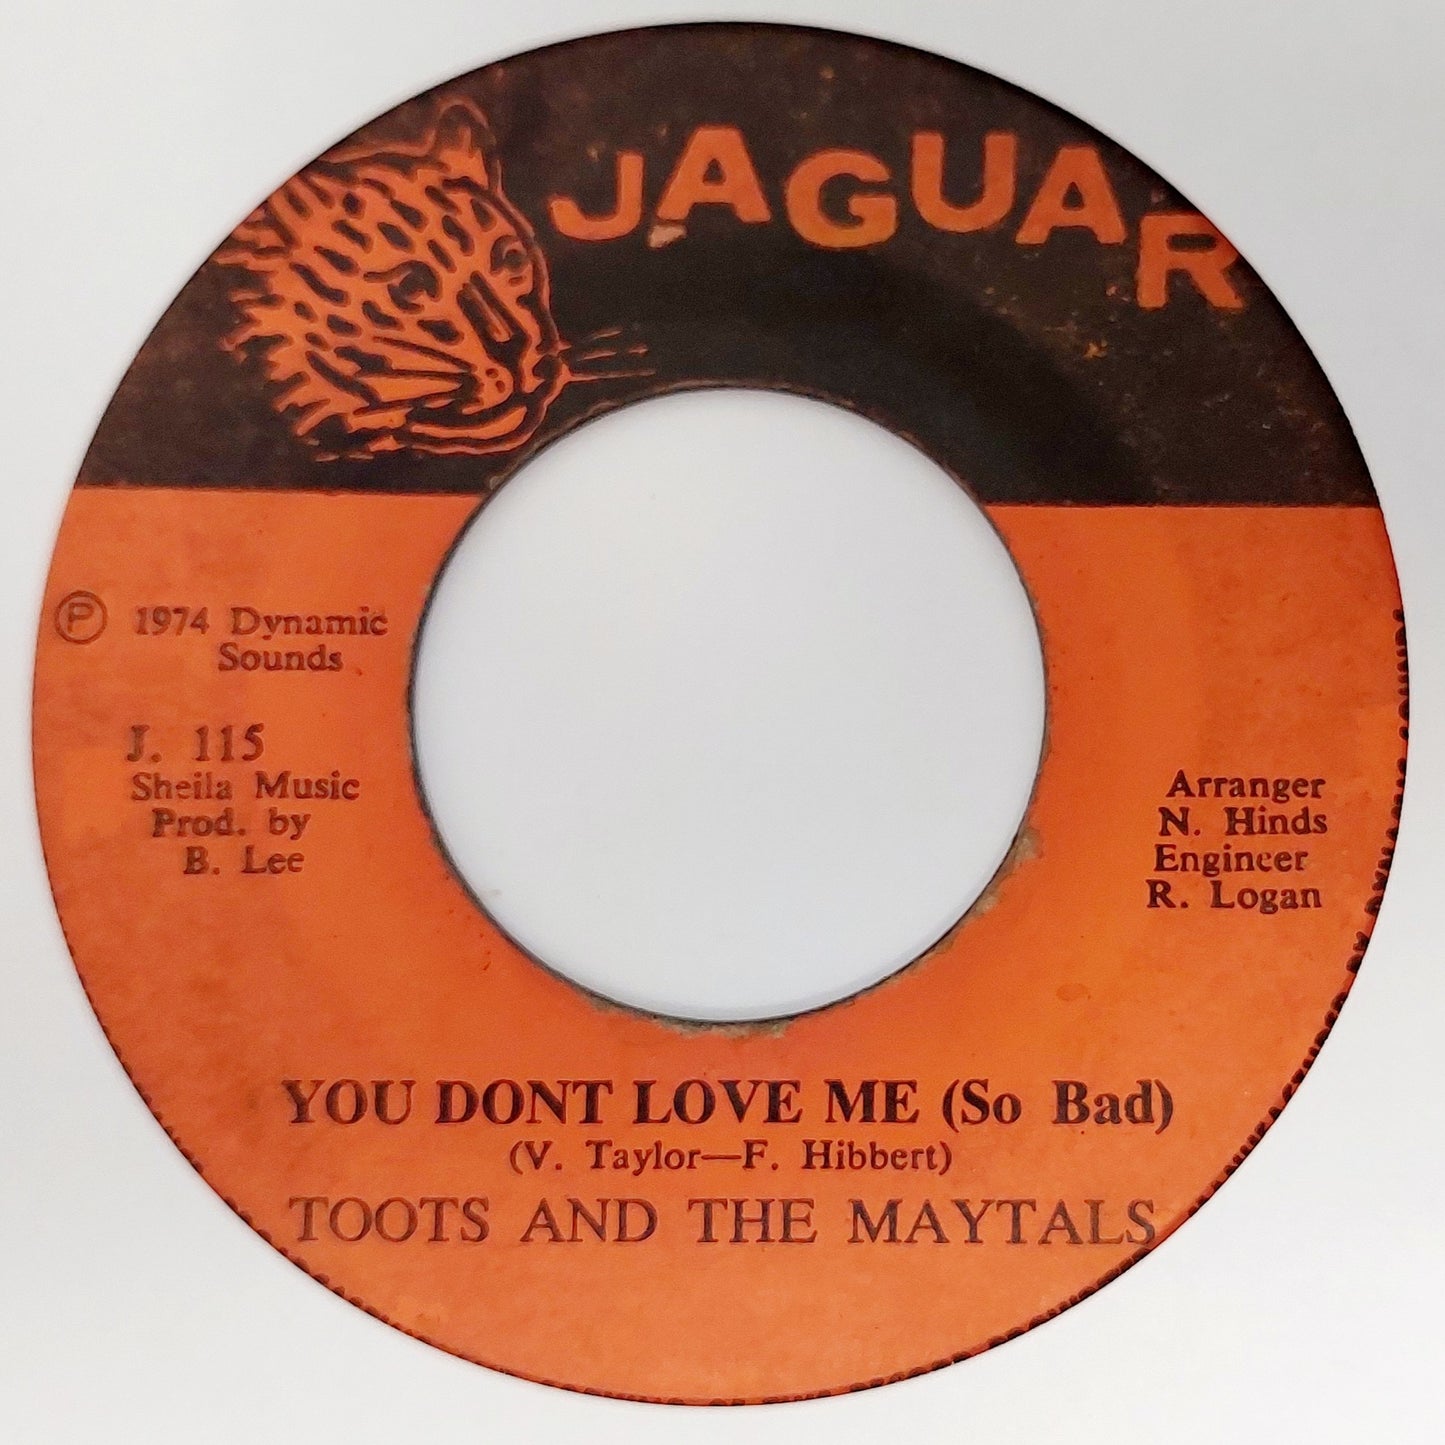 Toots & The Maytals / The Dynamites - You Don't Love Me (So Bad)